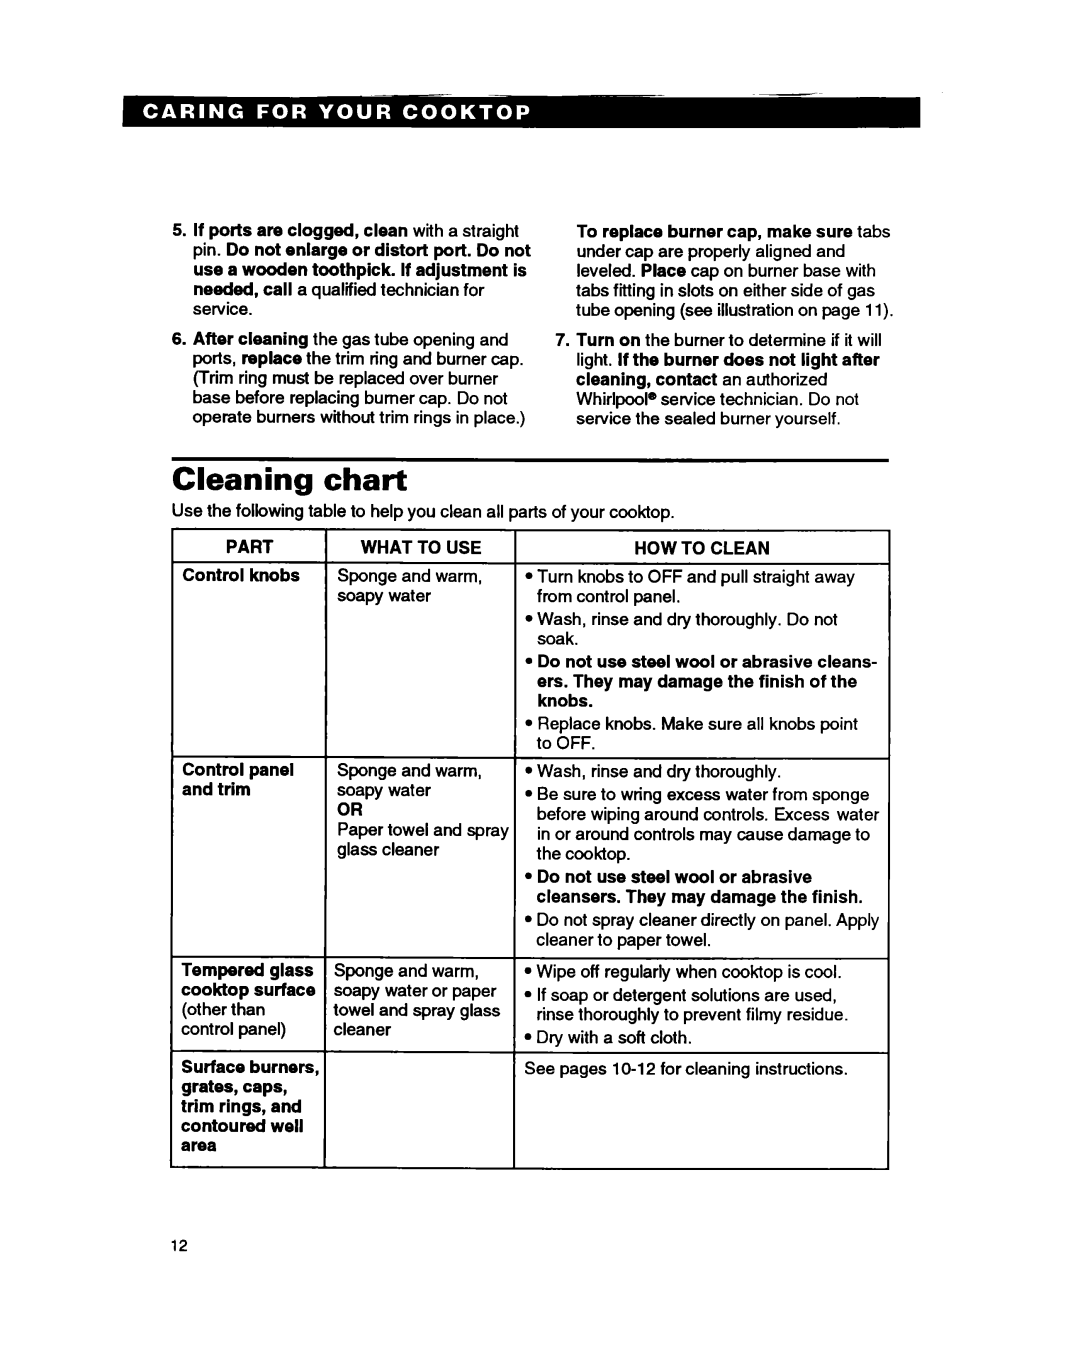 Whirlpool SC8636EB Cleaning chart, To replace burner cap, make sure tabs, Part, Control panel, and trim, How To Clean 